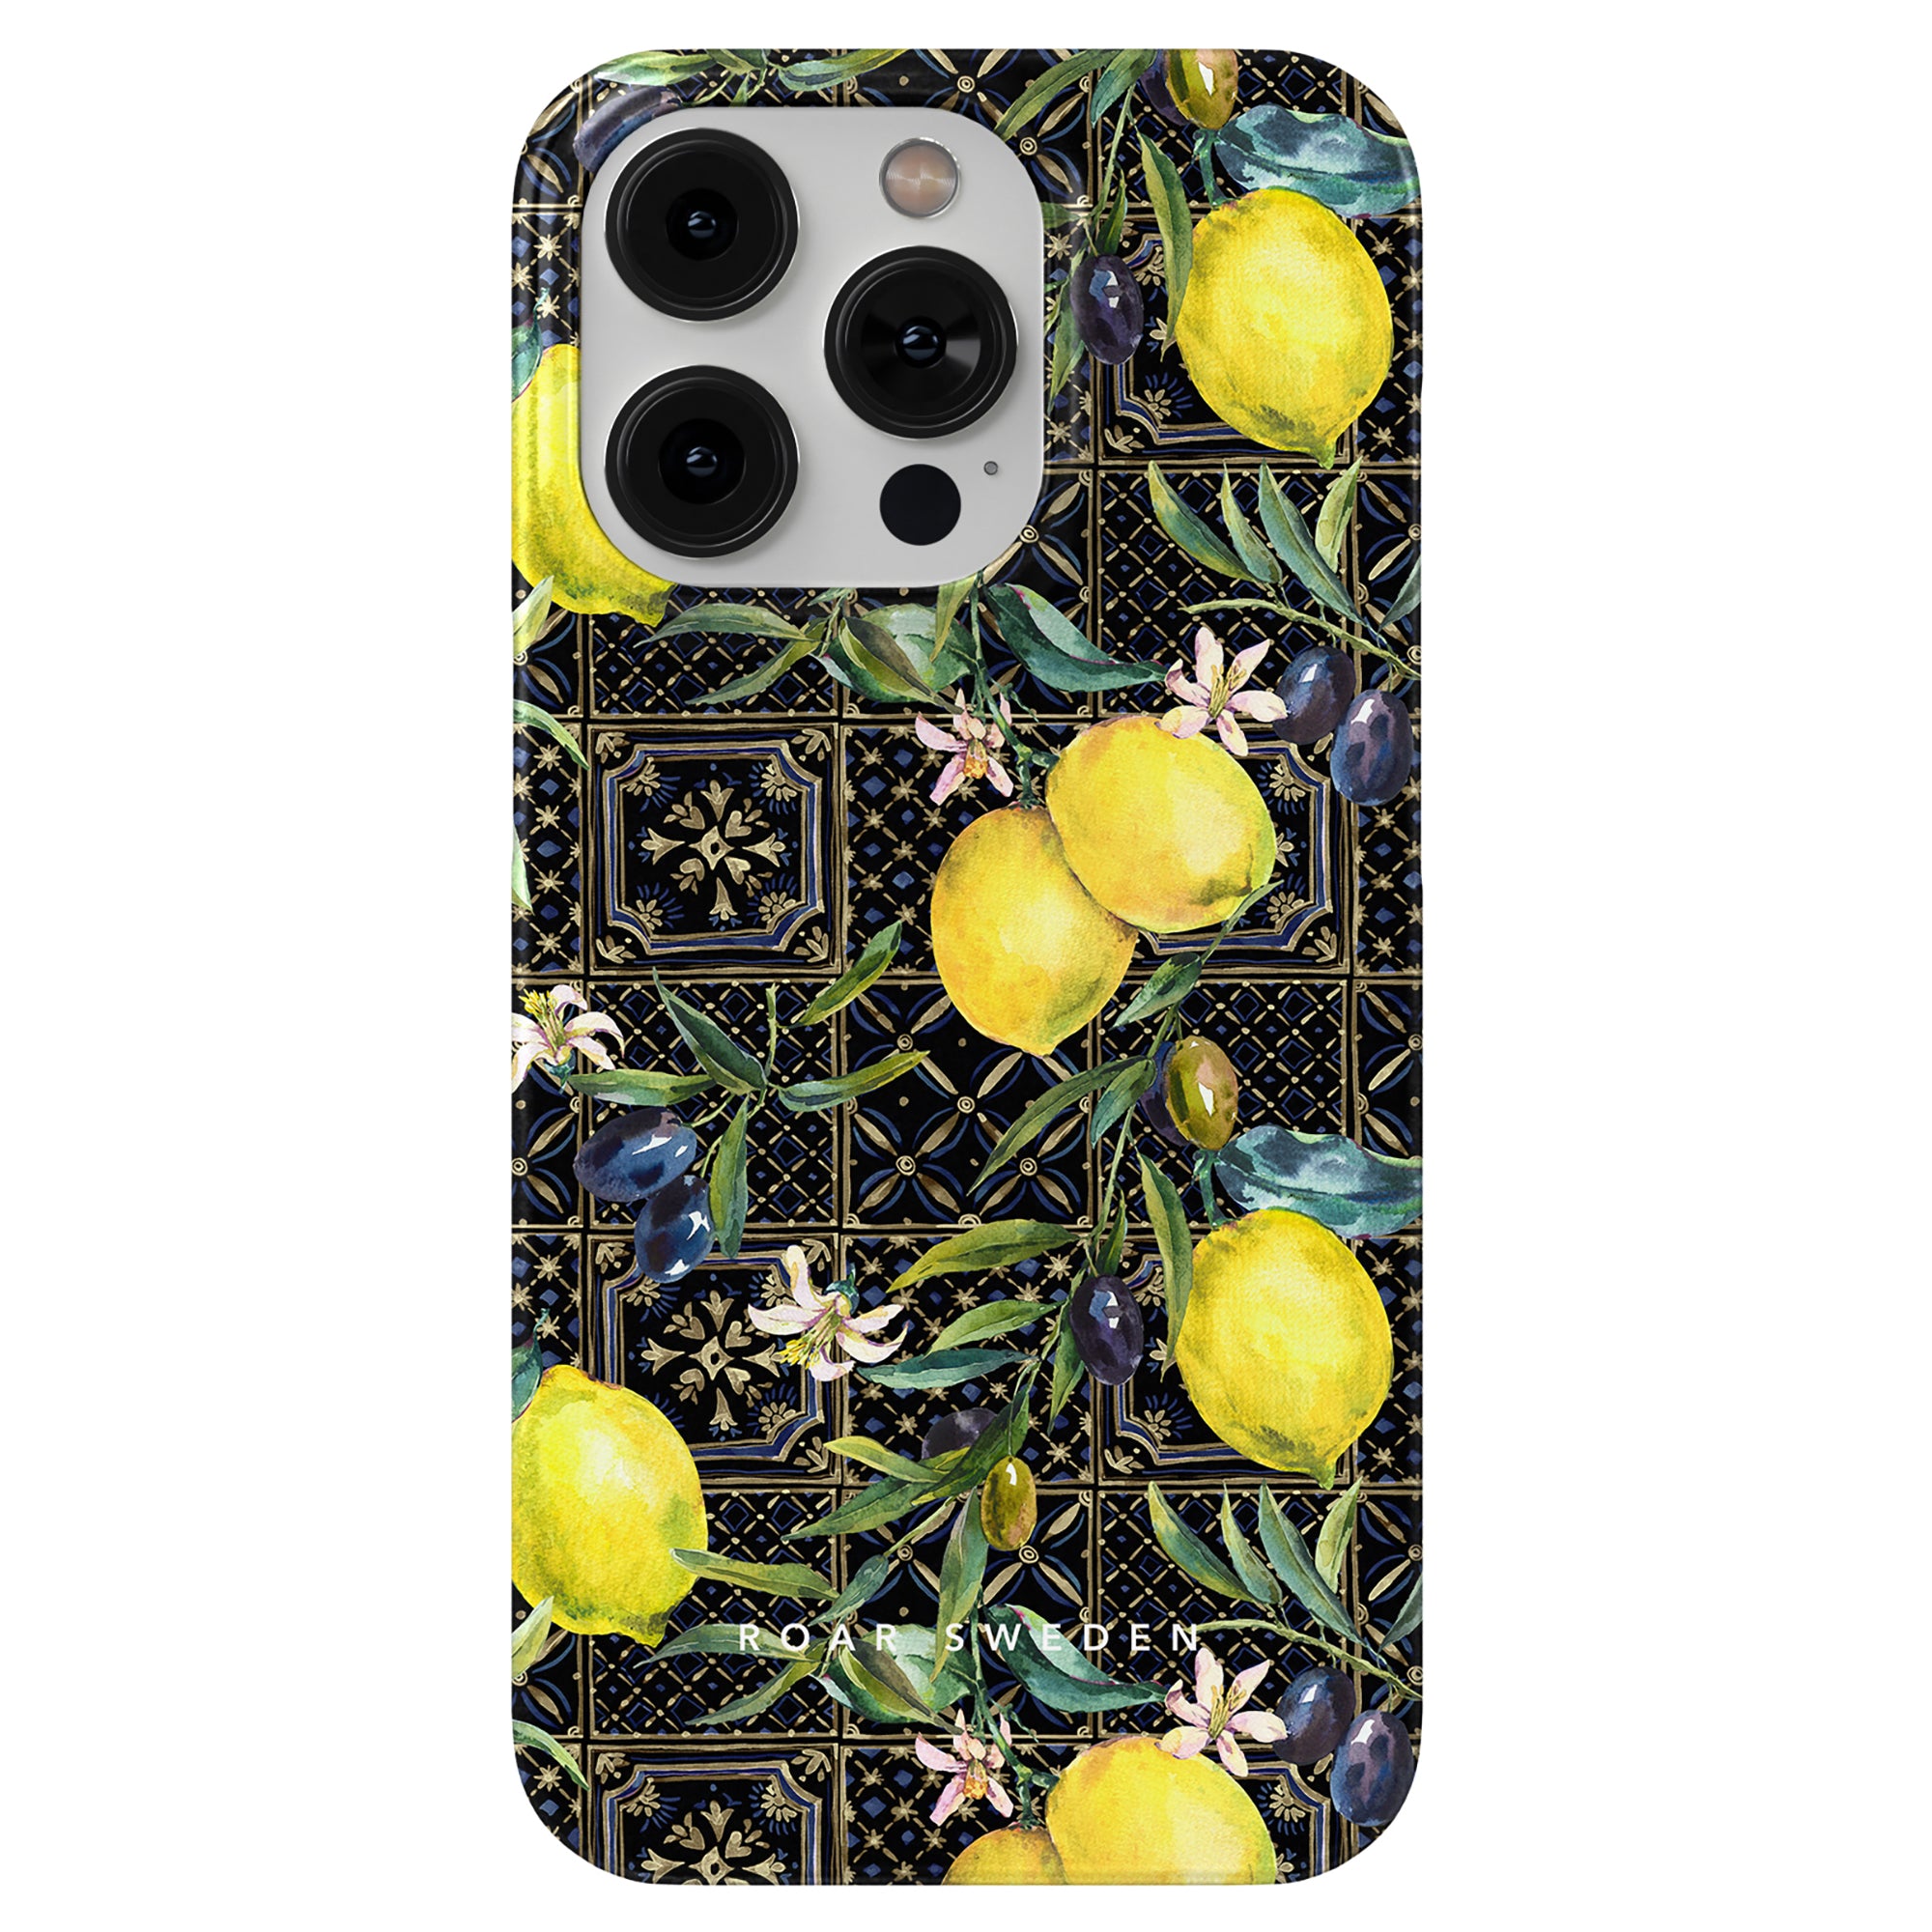 Decorative Sorrento - Slim case with lemon and floral design on a geometric background, inspired by the concept of natural ingredients.